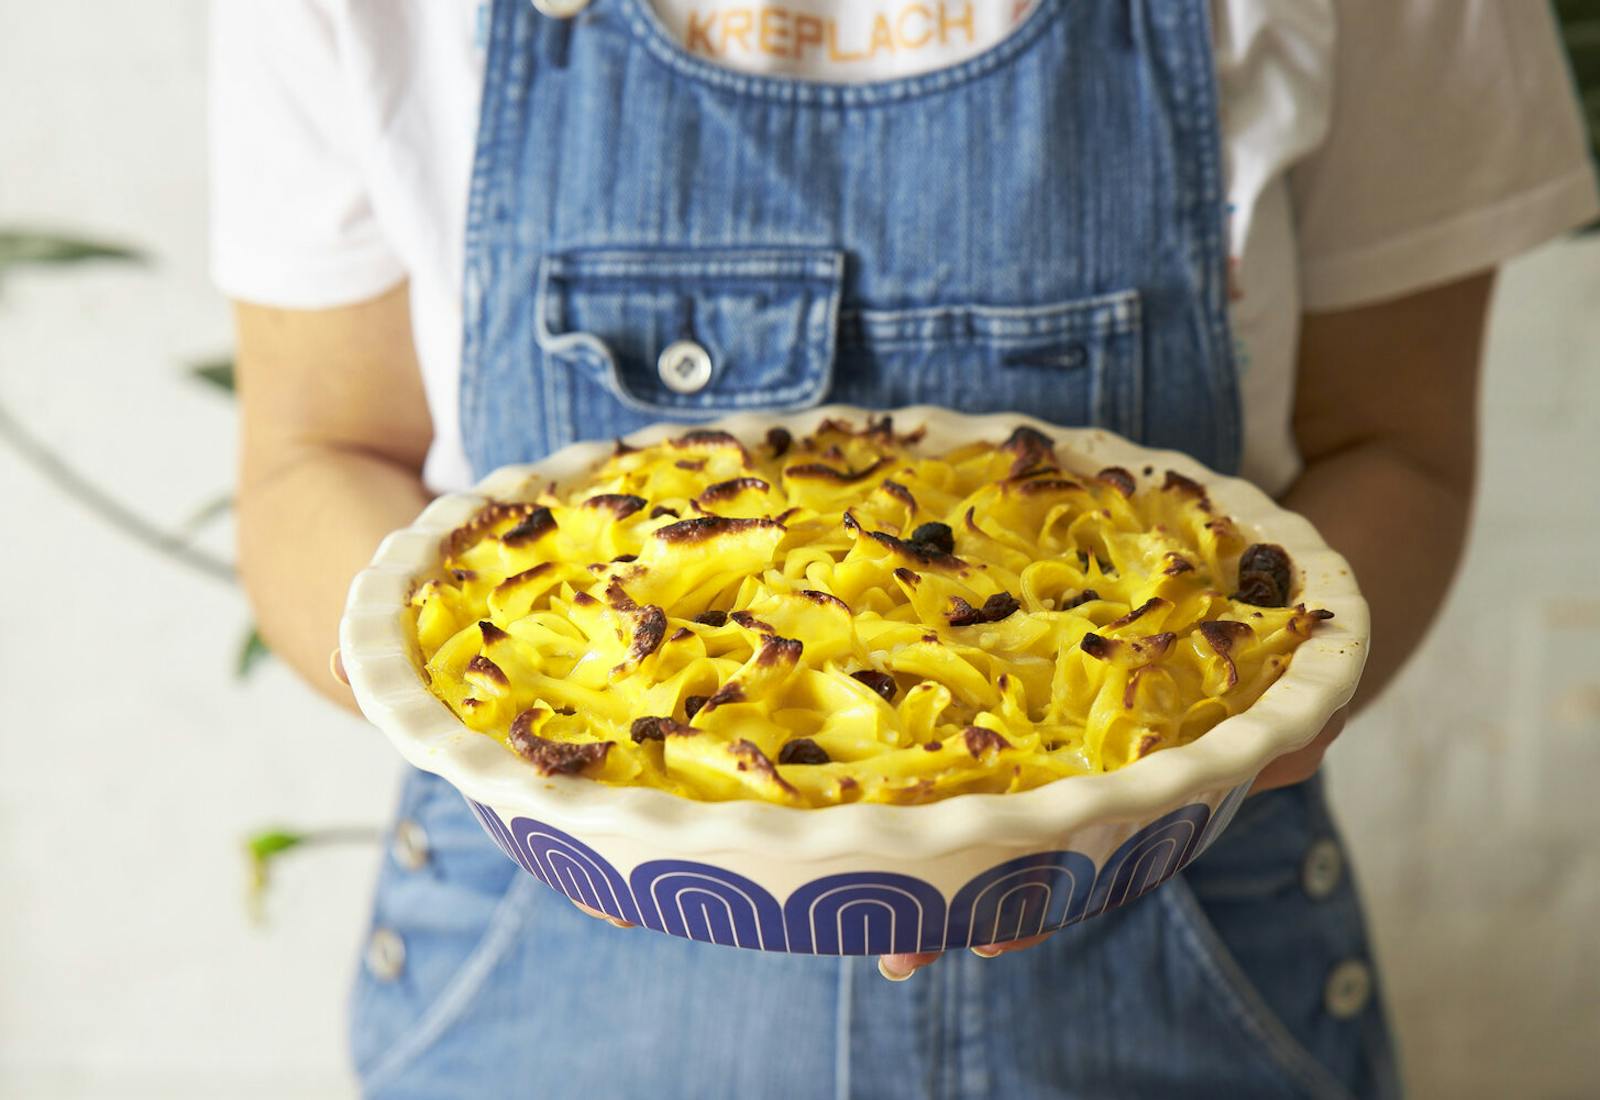 Chef in denim apron holding sweet noodle kugel in blue and white casserole dish.